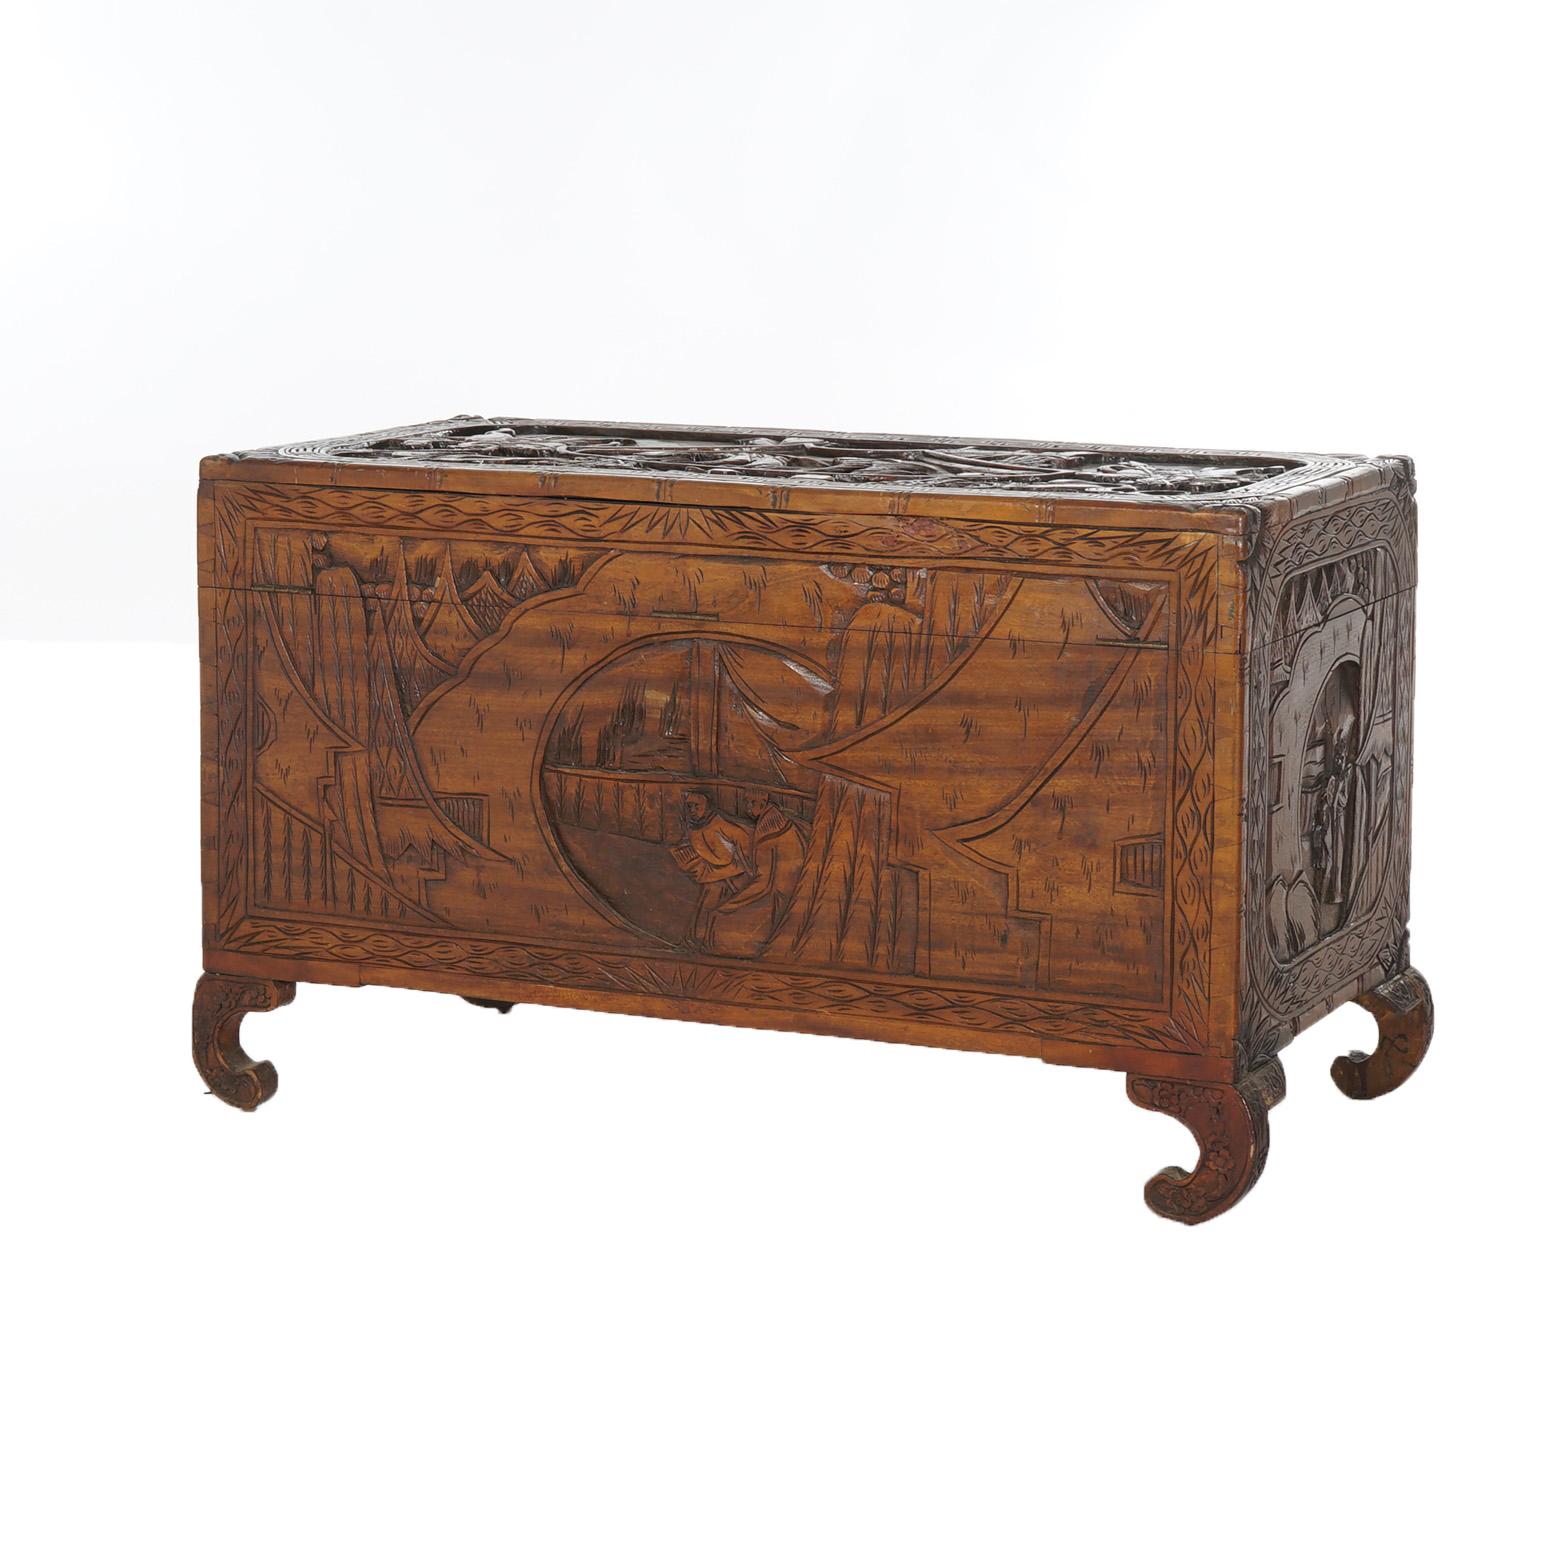 Antique Chinese Carved Hardwood Chest with Figures & Scenes in Relief C1920 For Sale 9